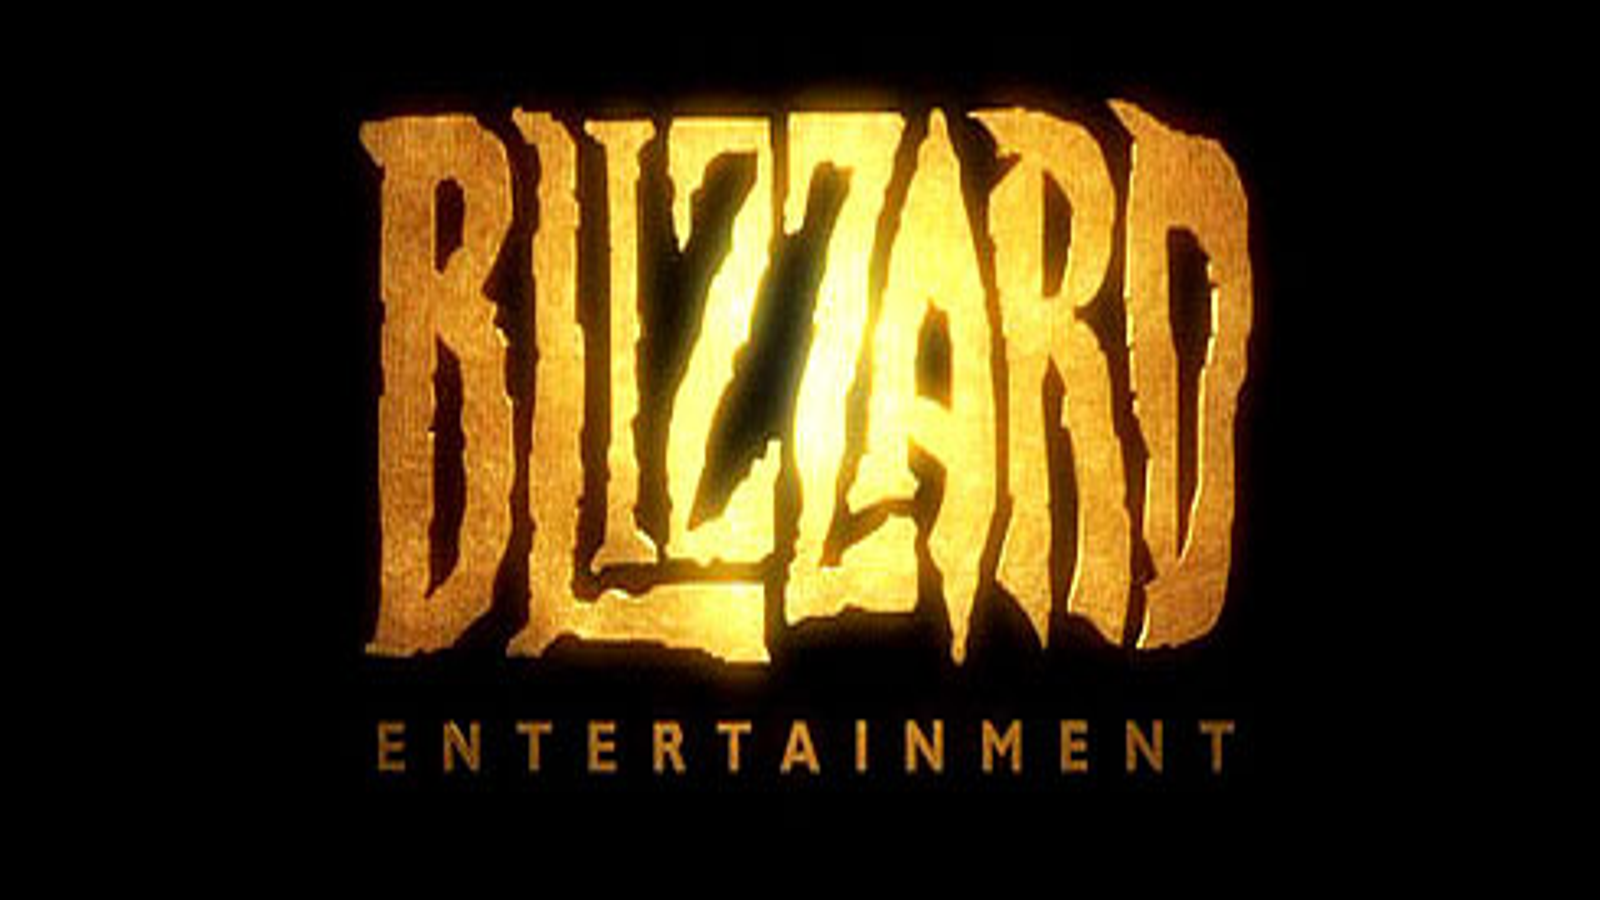 blizzard new mmo